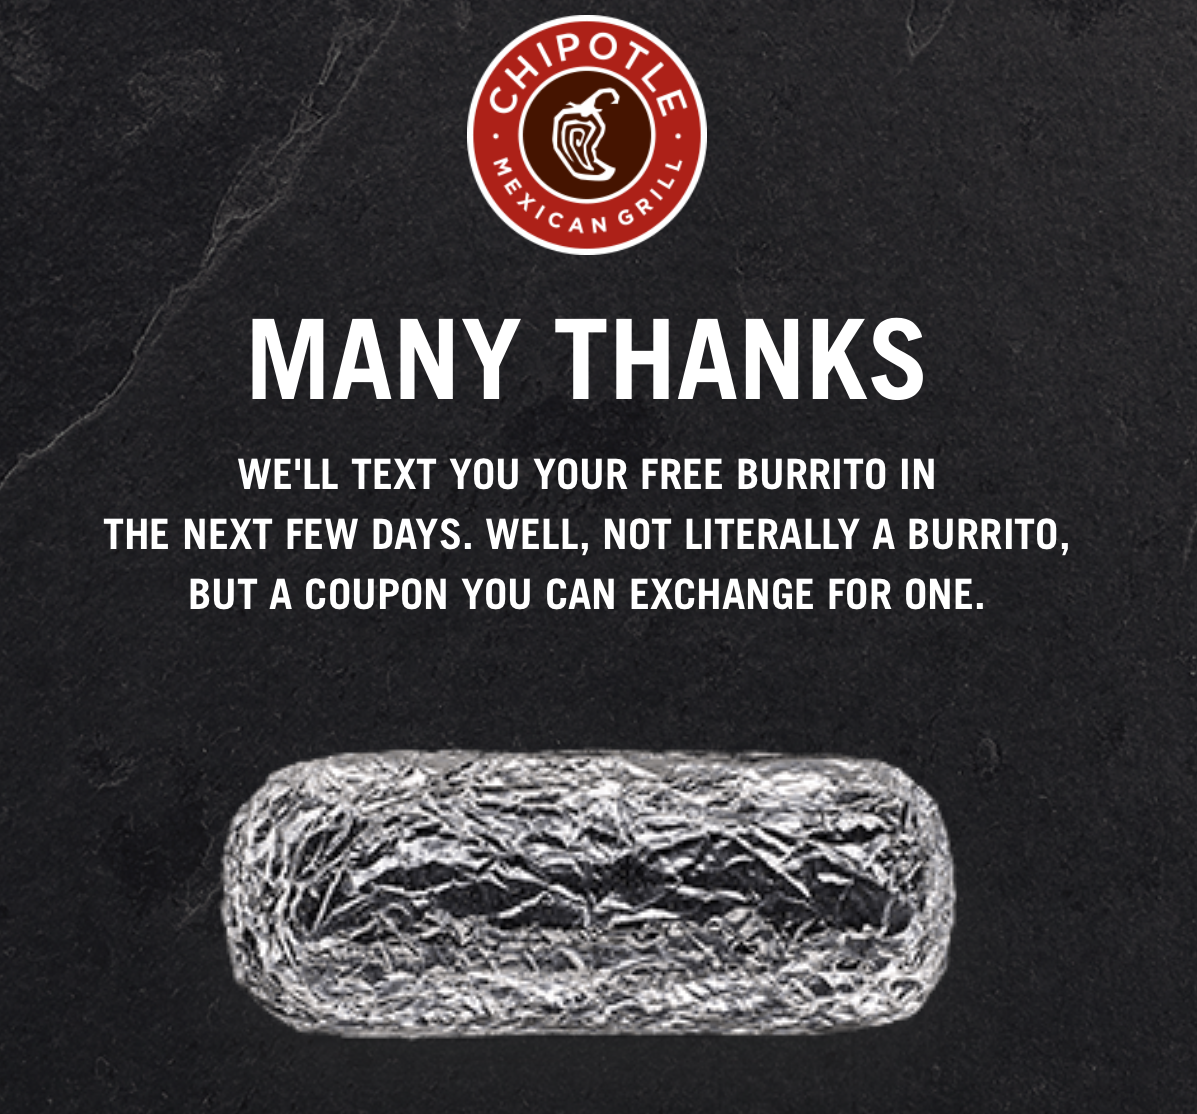 Chipotle’s Closed Today, But You Can Get A ‘Raincheck’ Free Burrito… Or A Deal From Competitors